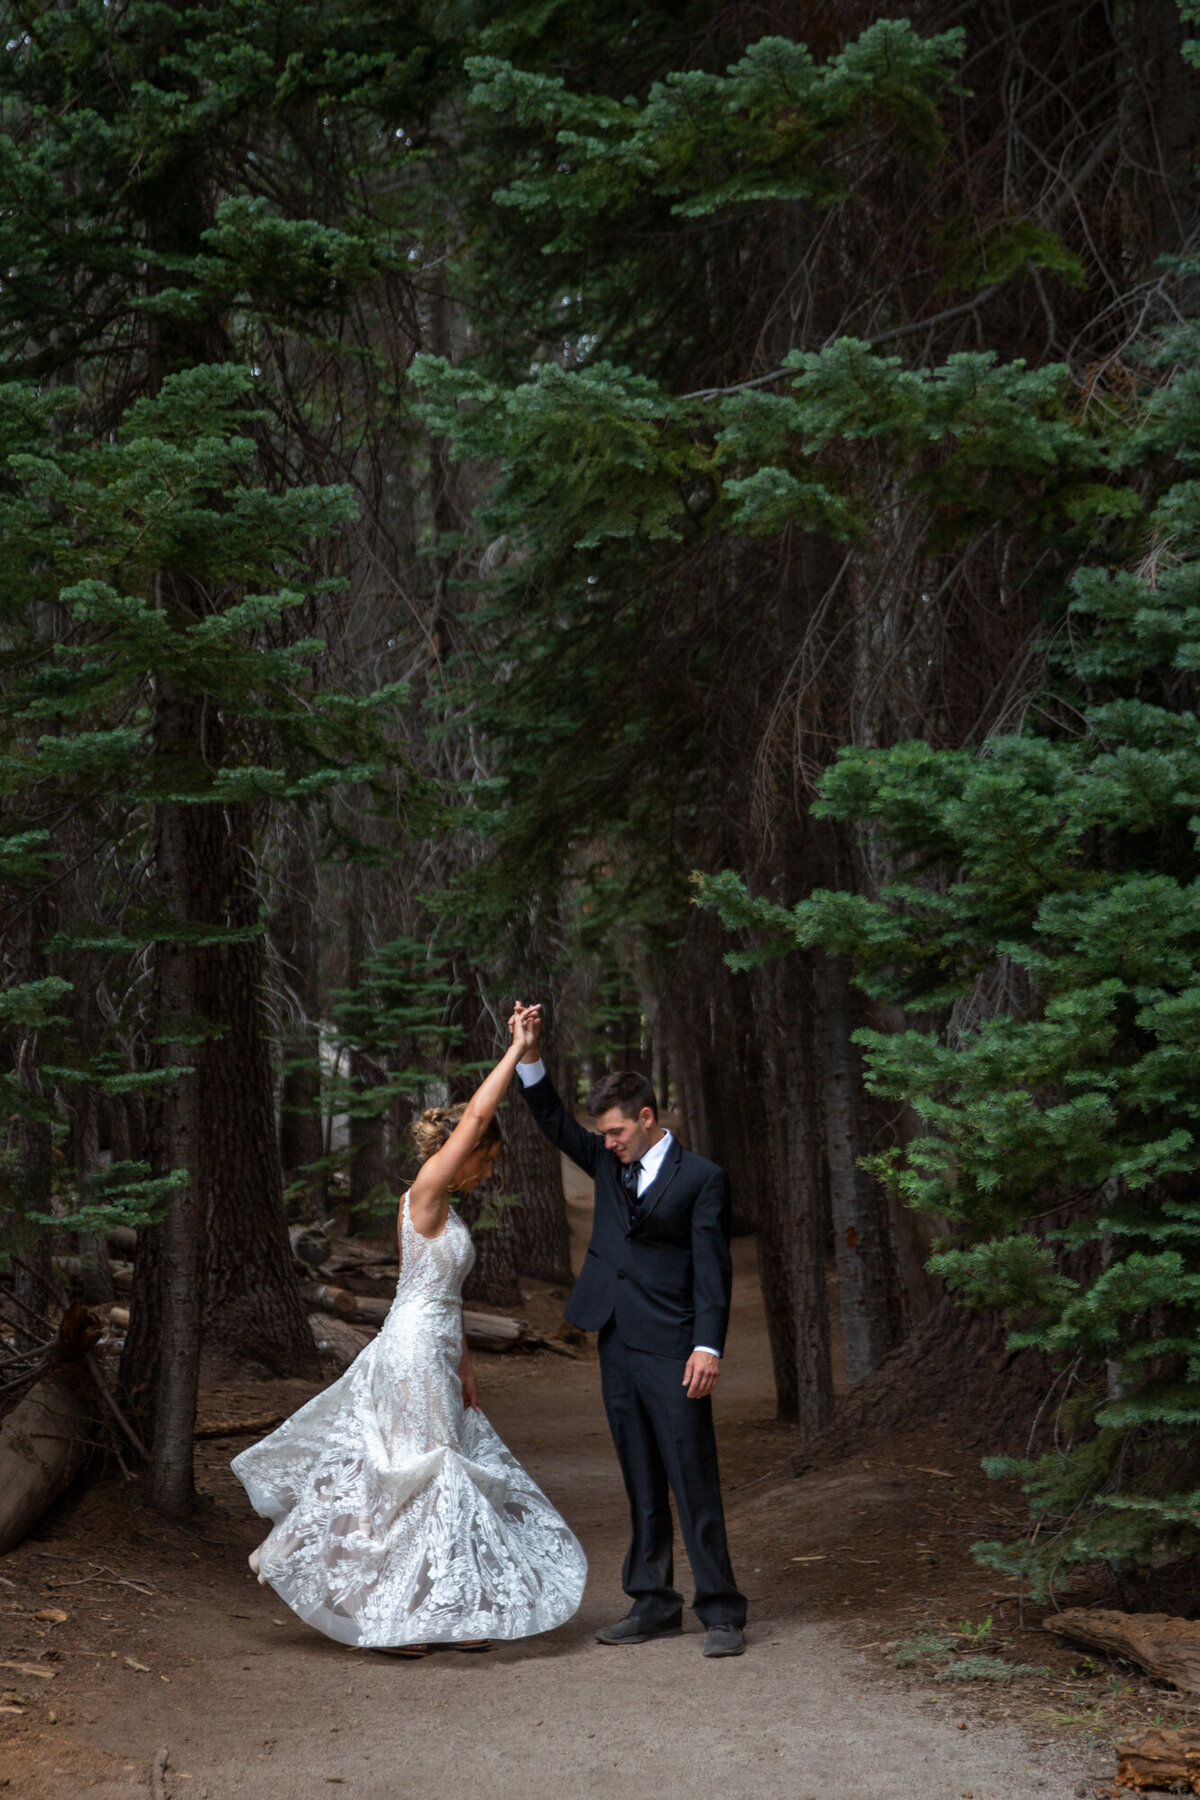 A groom twirls his bride as they stand in a grove of trees.